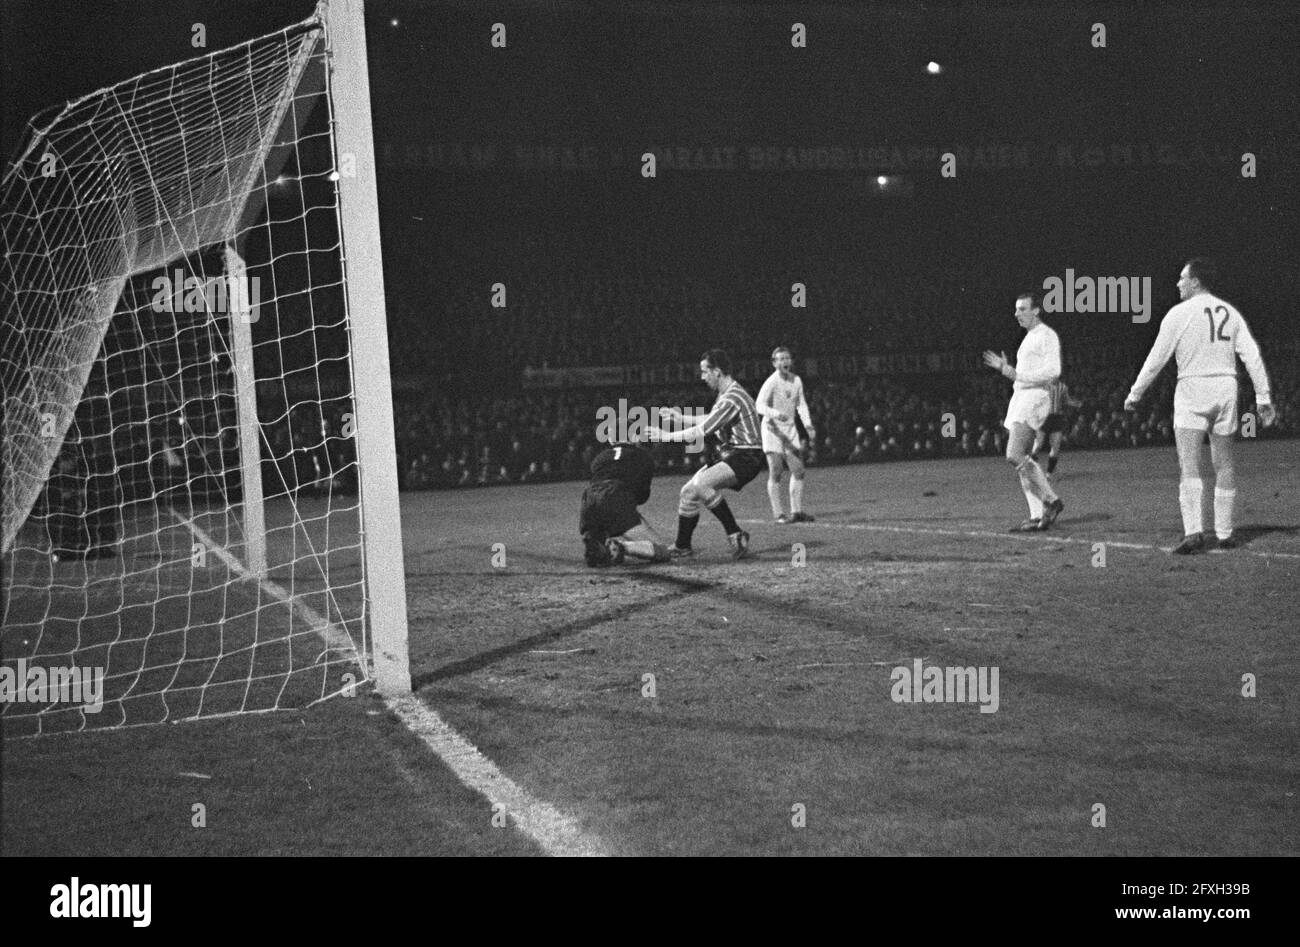 Soccer Semi-Final Intertoto; Feyenoord - Banik Ostrava (Czech Republic) 1-0. Moulijn at Czech goalkeeper, 8 March 1962, sports, soccer, The Netherlands, 20th century press agency photo, news to remember, documentary, historic photography 1945-1990, visual stories, human history of the Twentieth Century, capturing moments in time Stock Photo